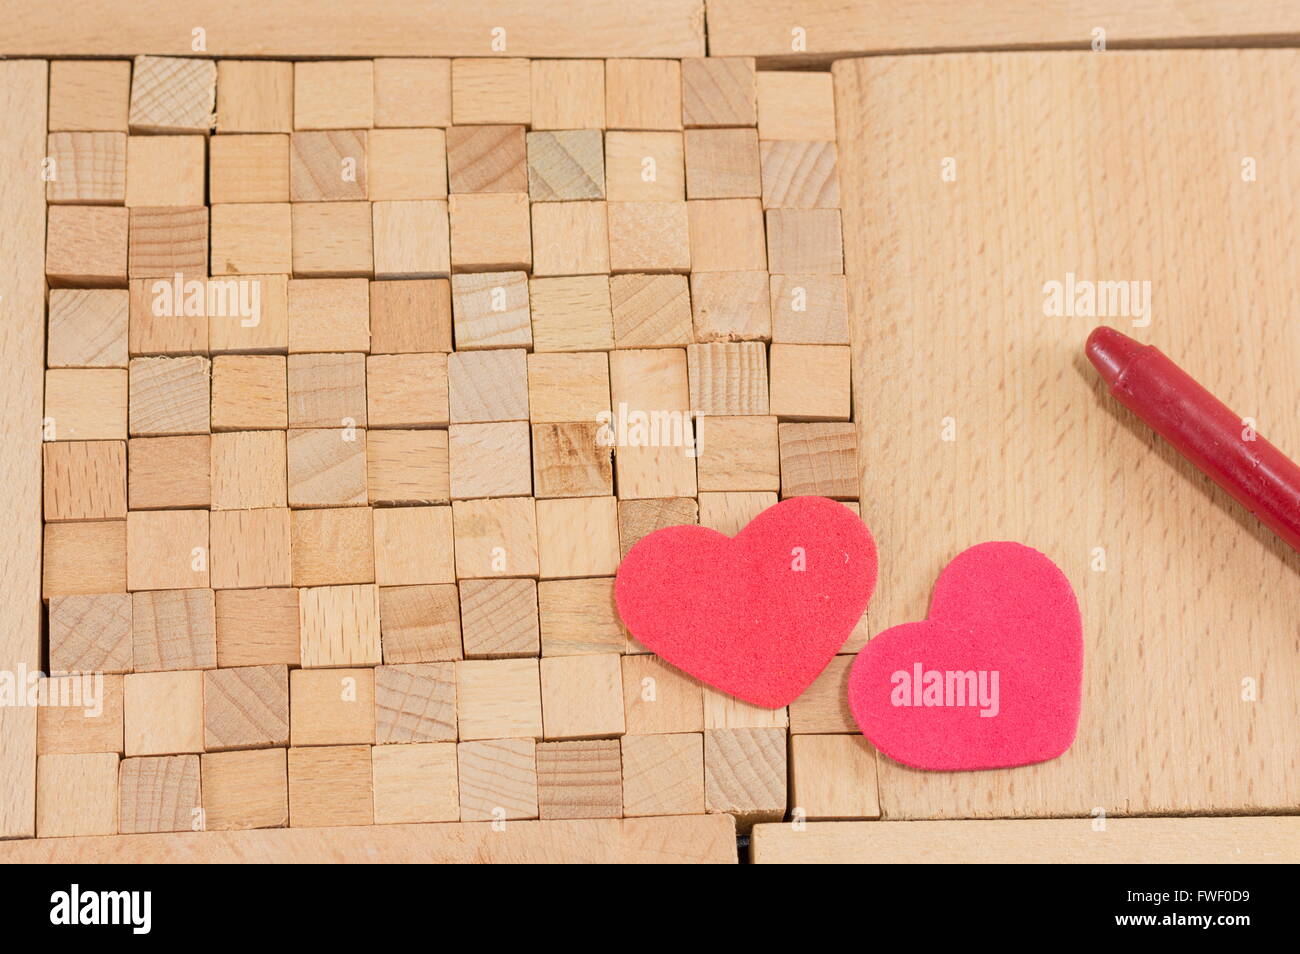 brown wooden blocks with hearts arranged on the blocks Stock Photo